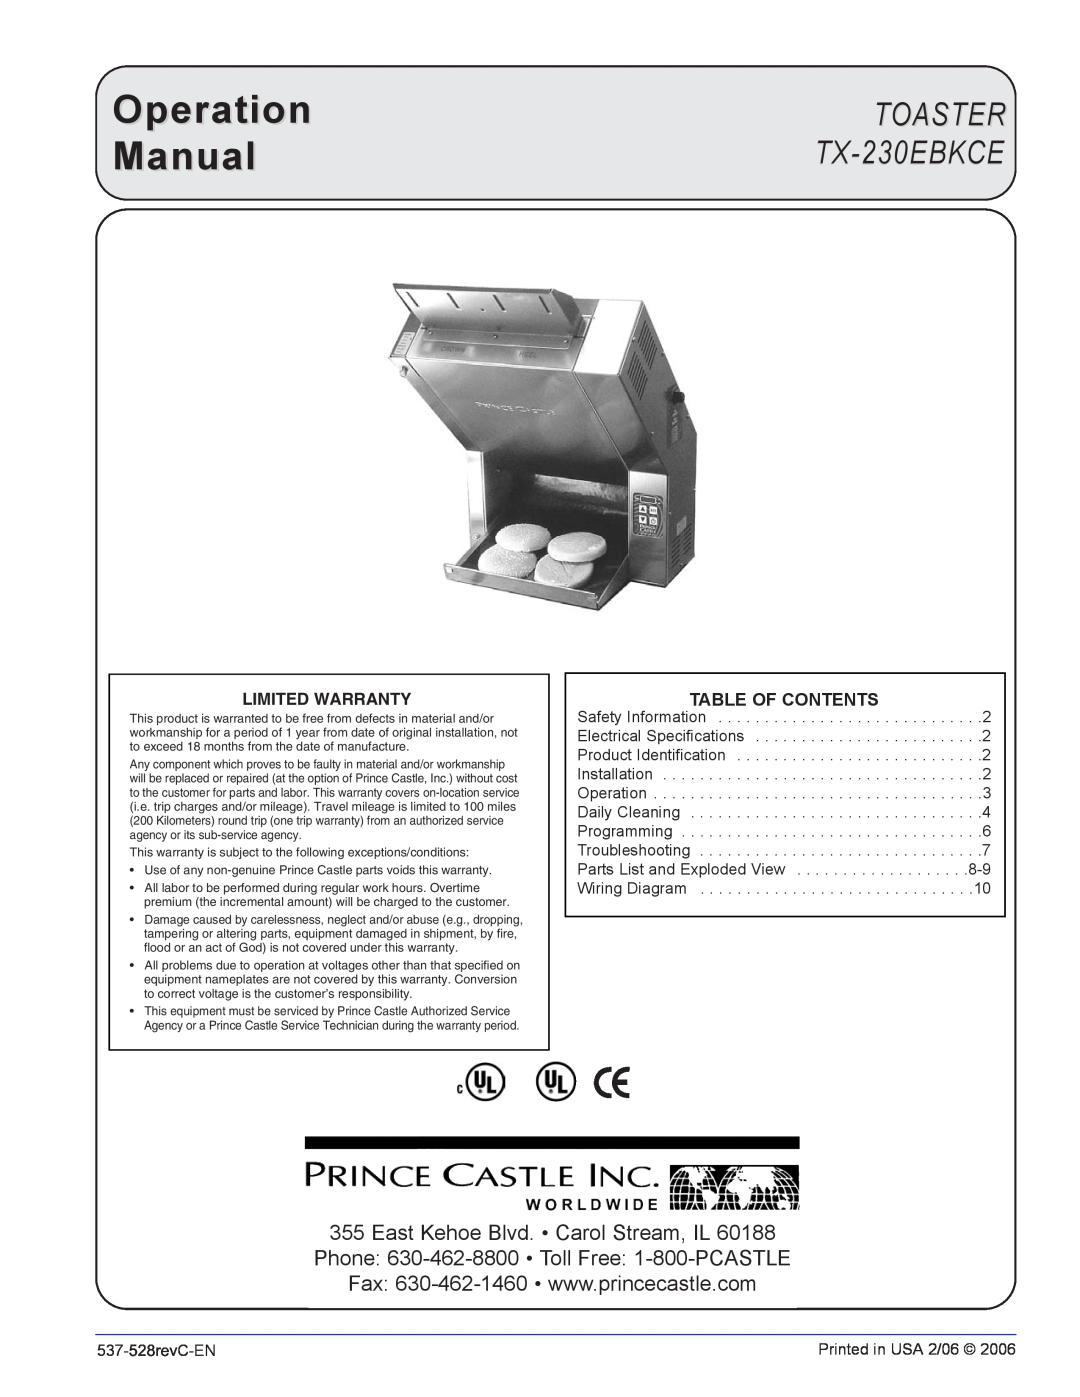 Prince Castle operation manual Table Of Contents, TOASTER TX-230EBKCE, Limited Warranty 